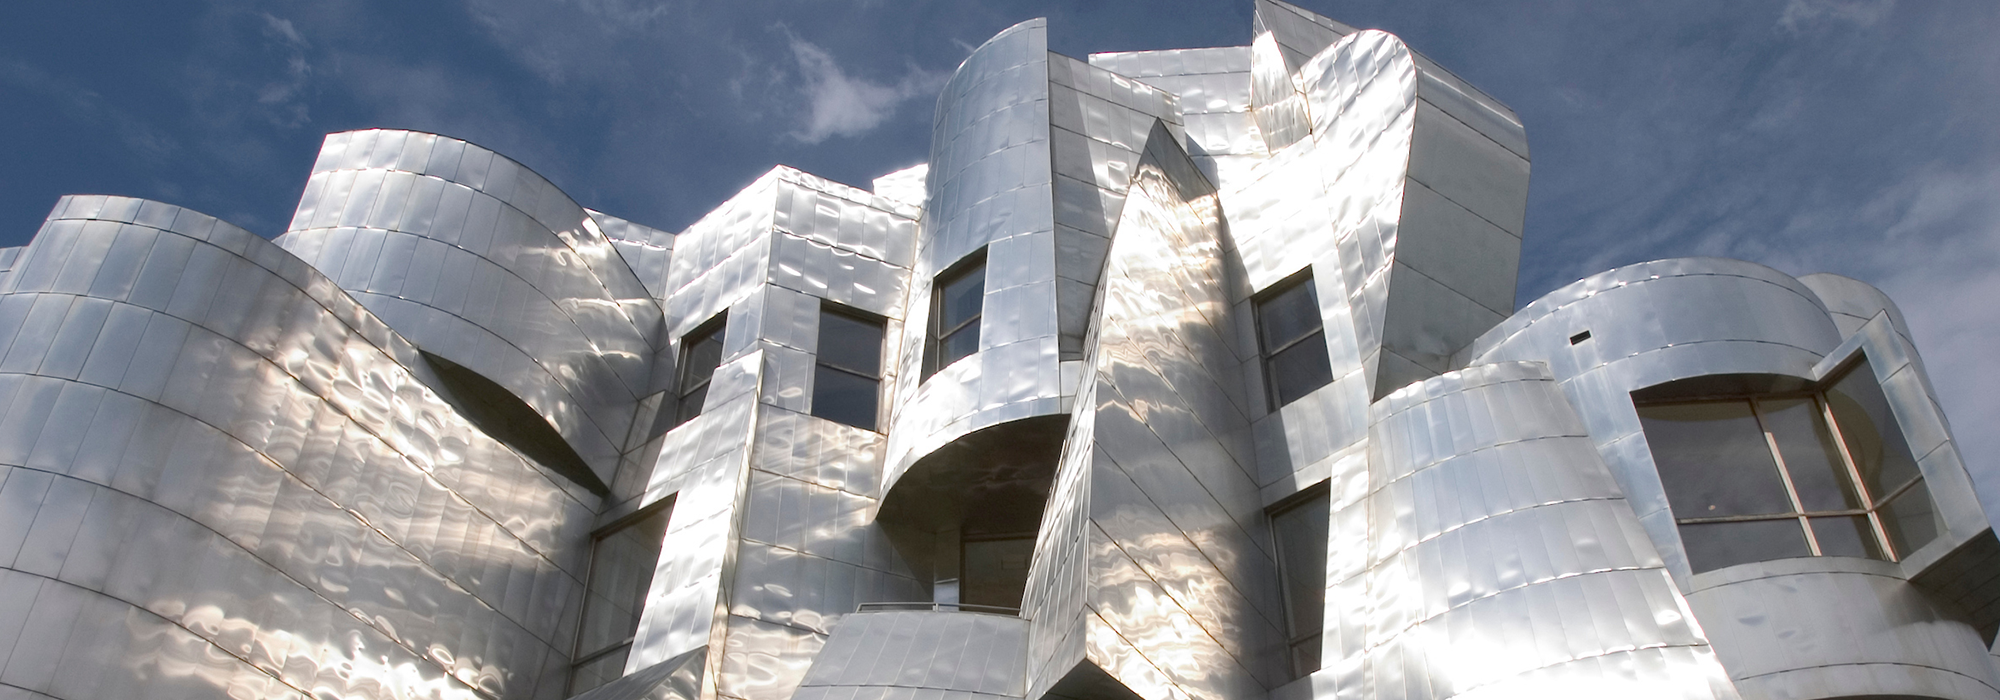 the exterior of Weisman against a cloudy blue sky